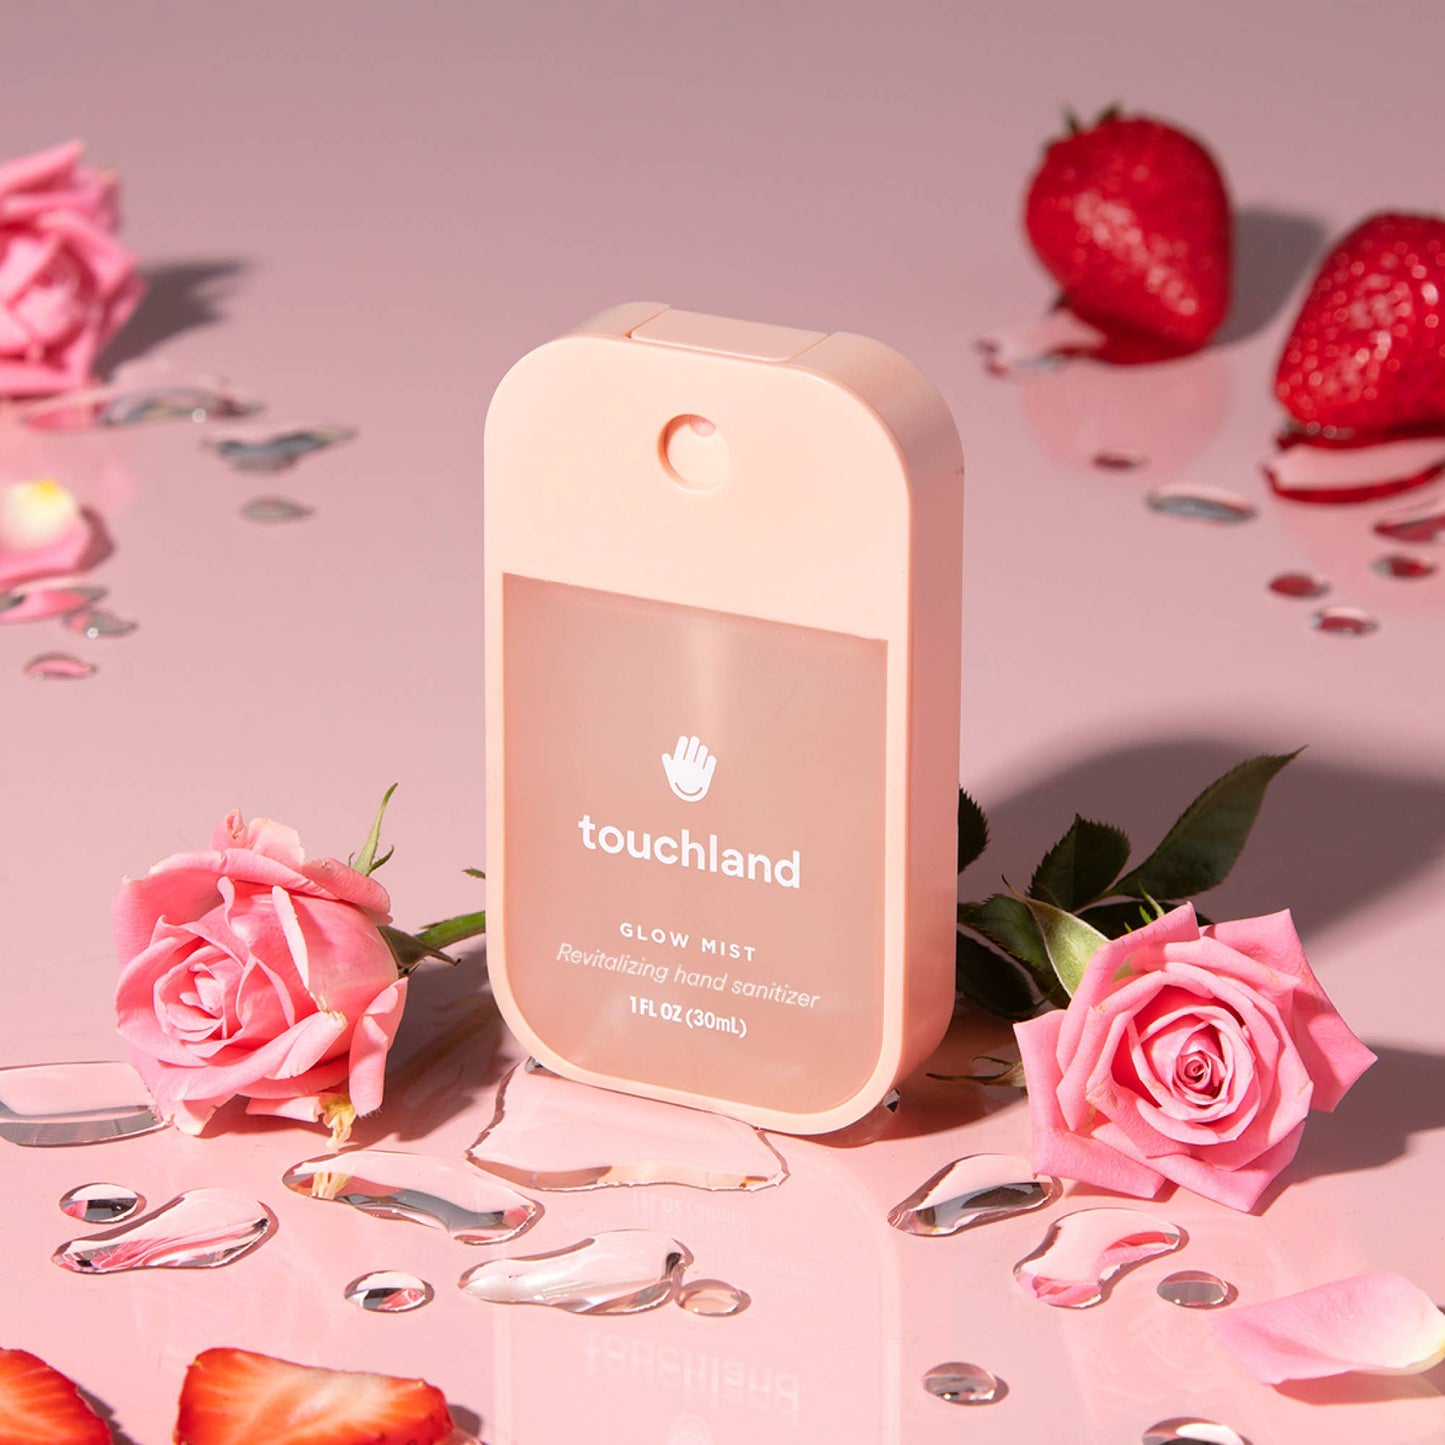 Touchland Glow Mist Rosewater